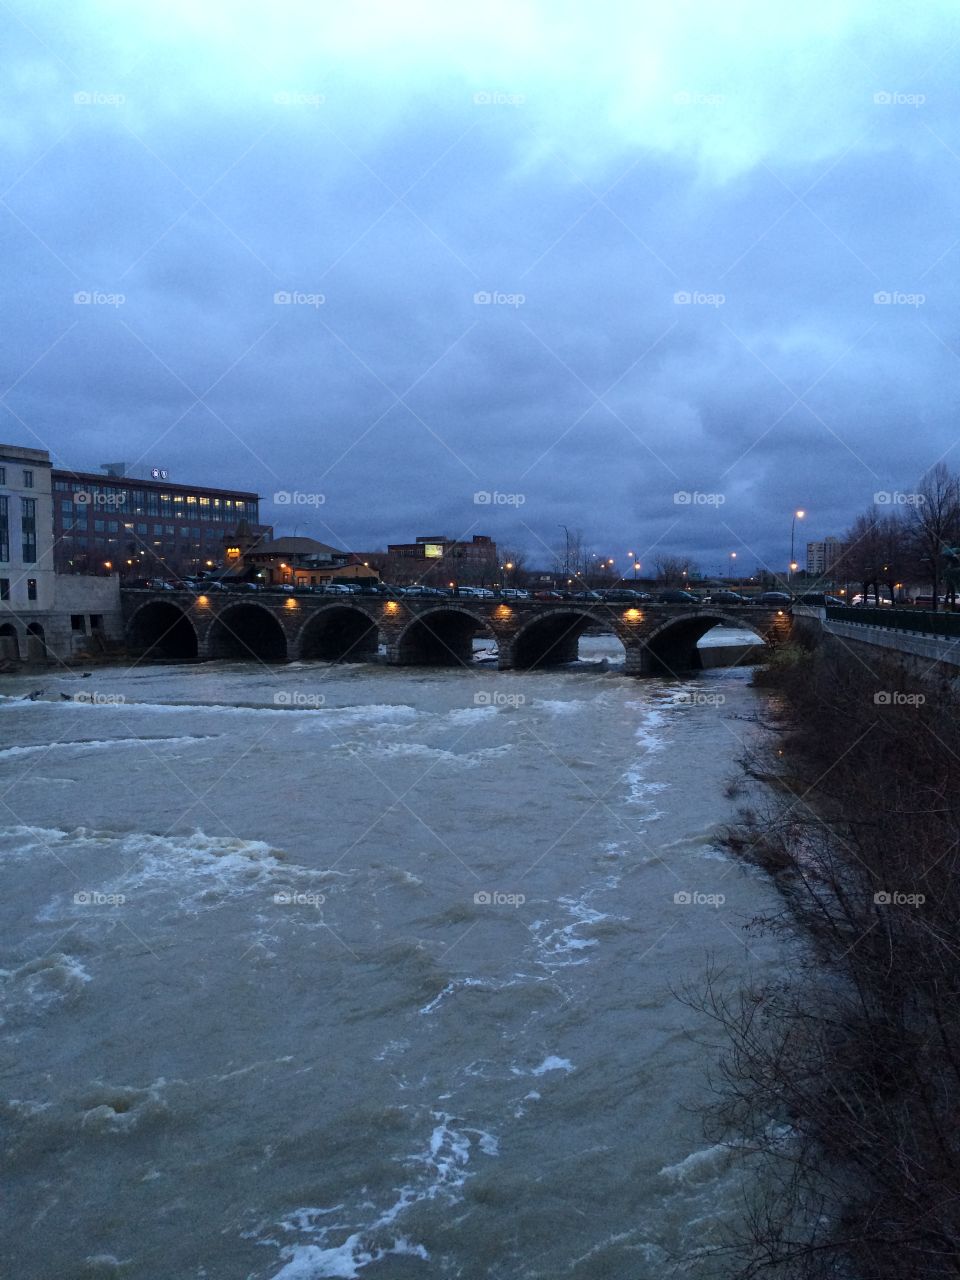 The Genesee River, Rochester, New York, on a cloudy evening